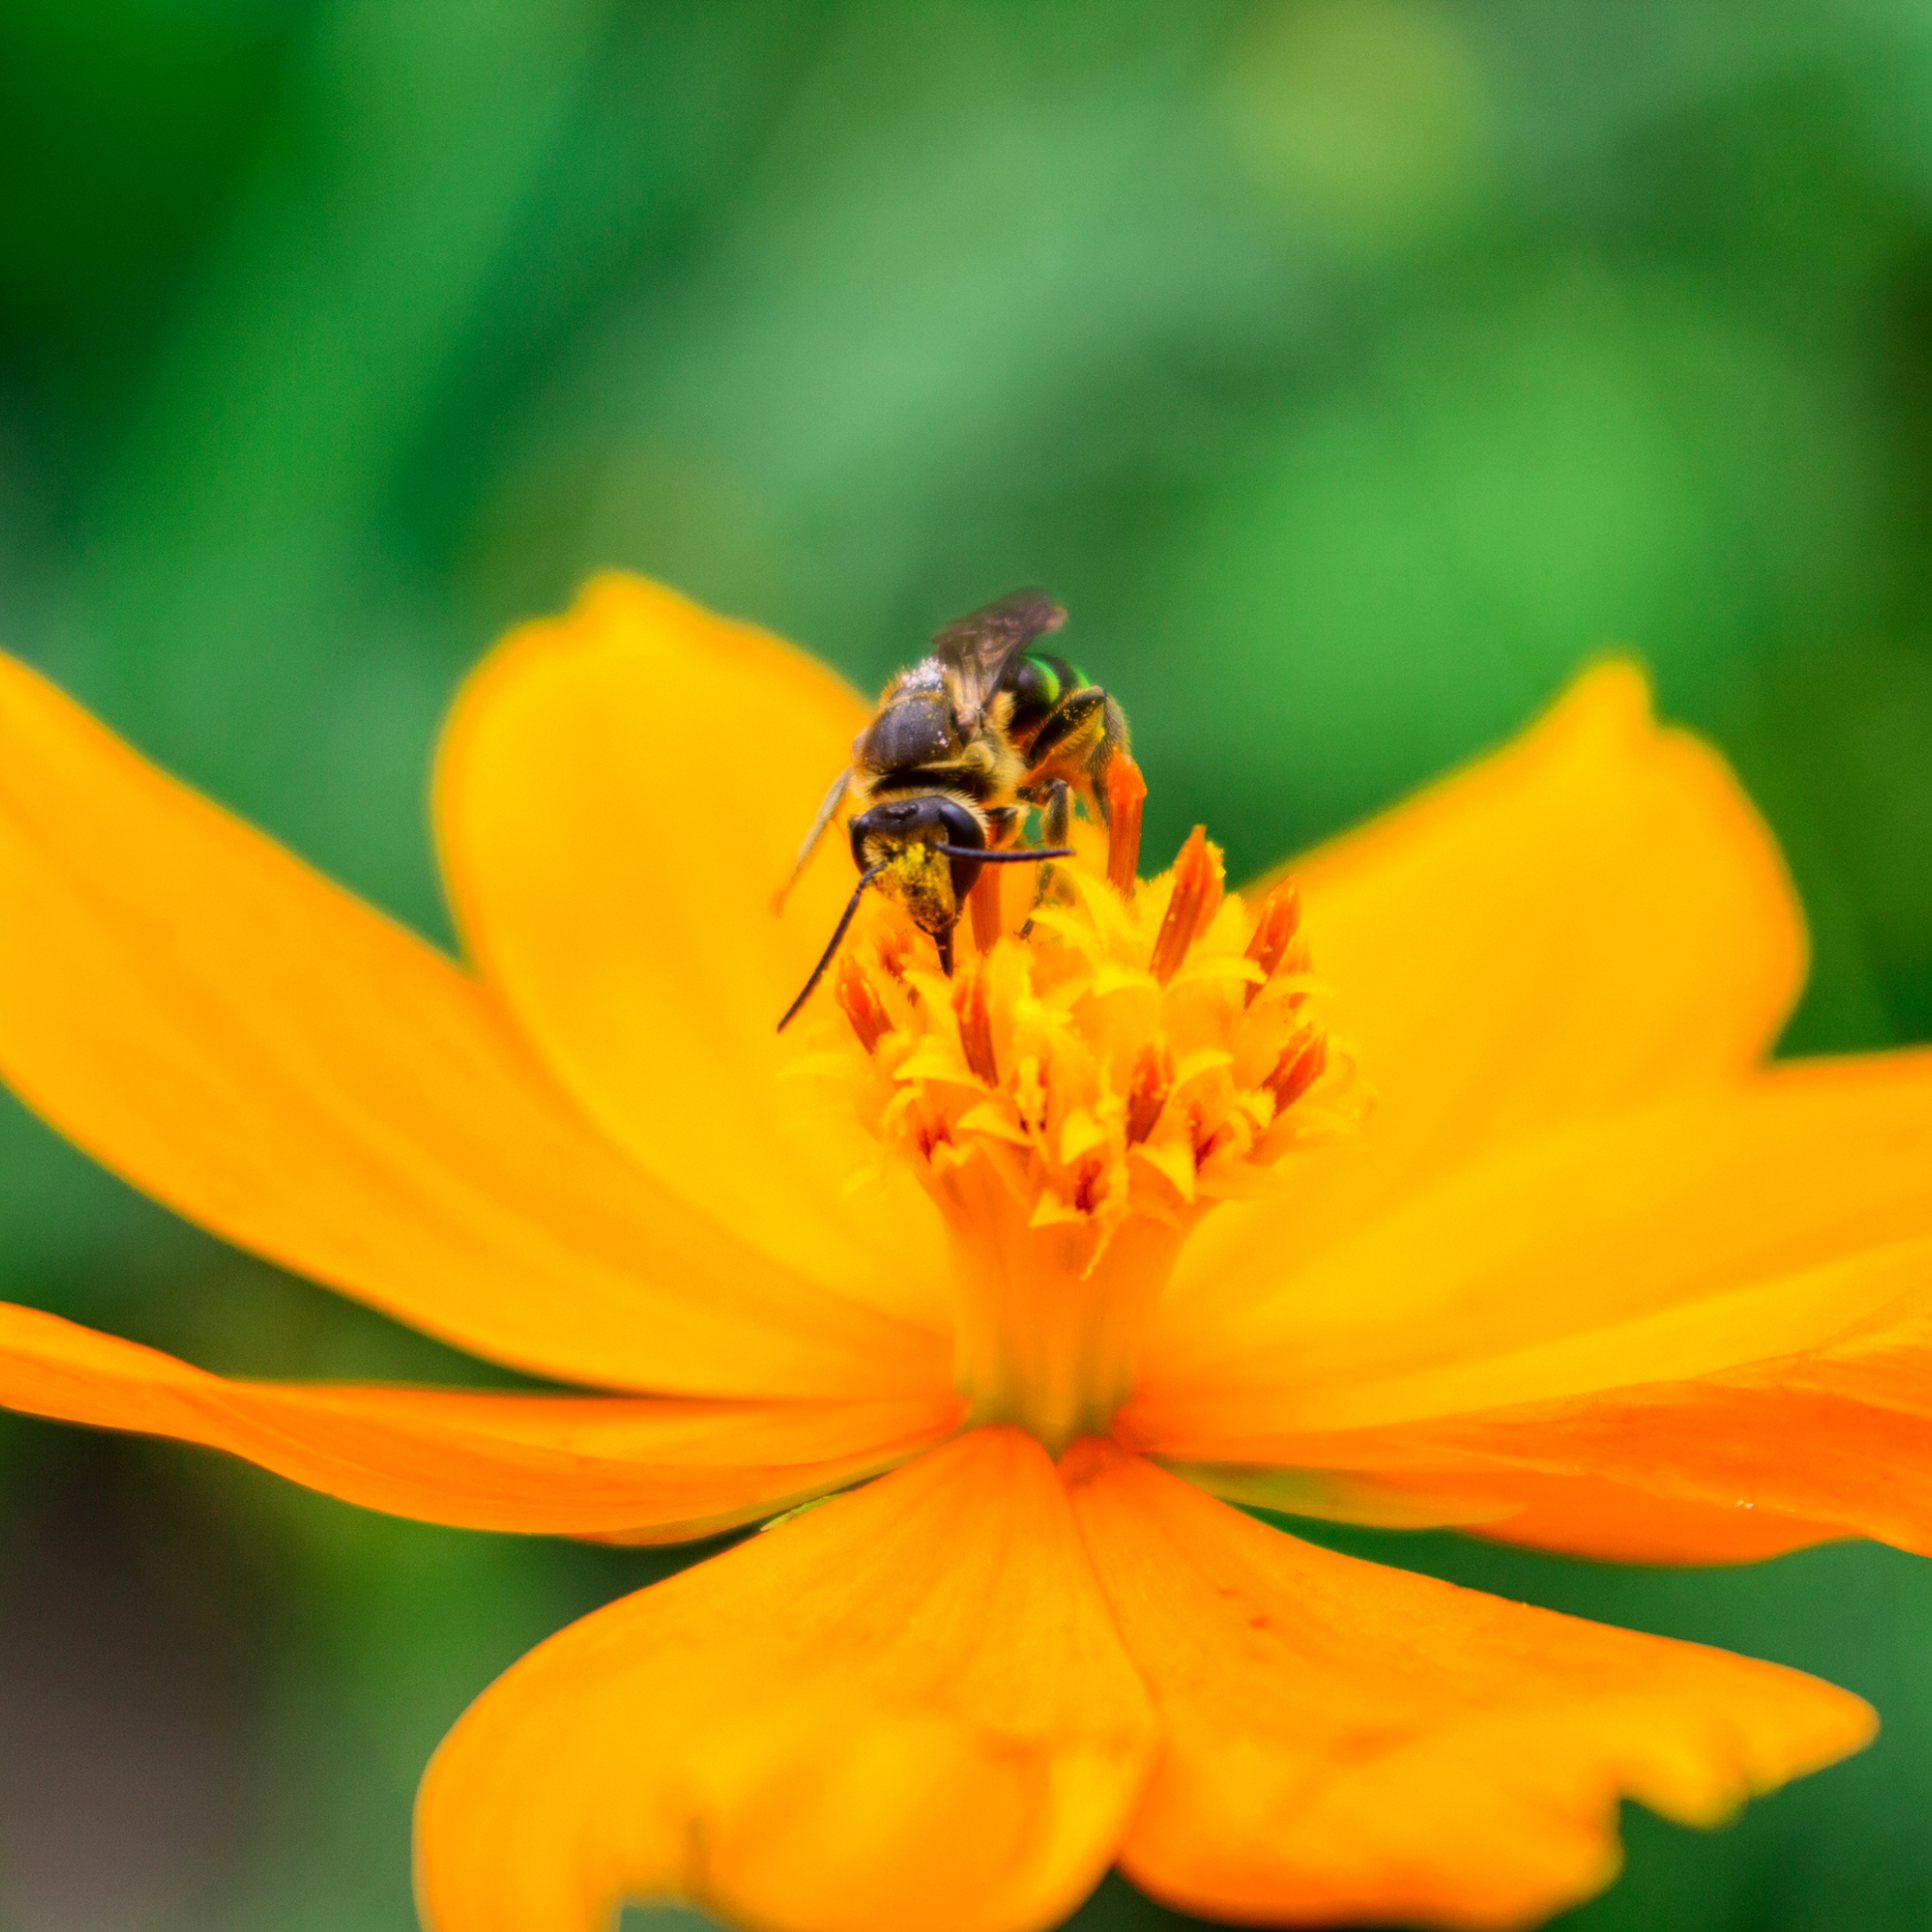 Close-up of a bee pollinating an orange flower, representing the pollination process